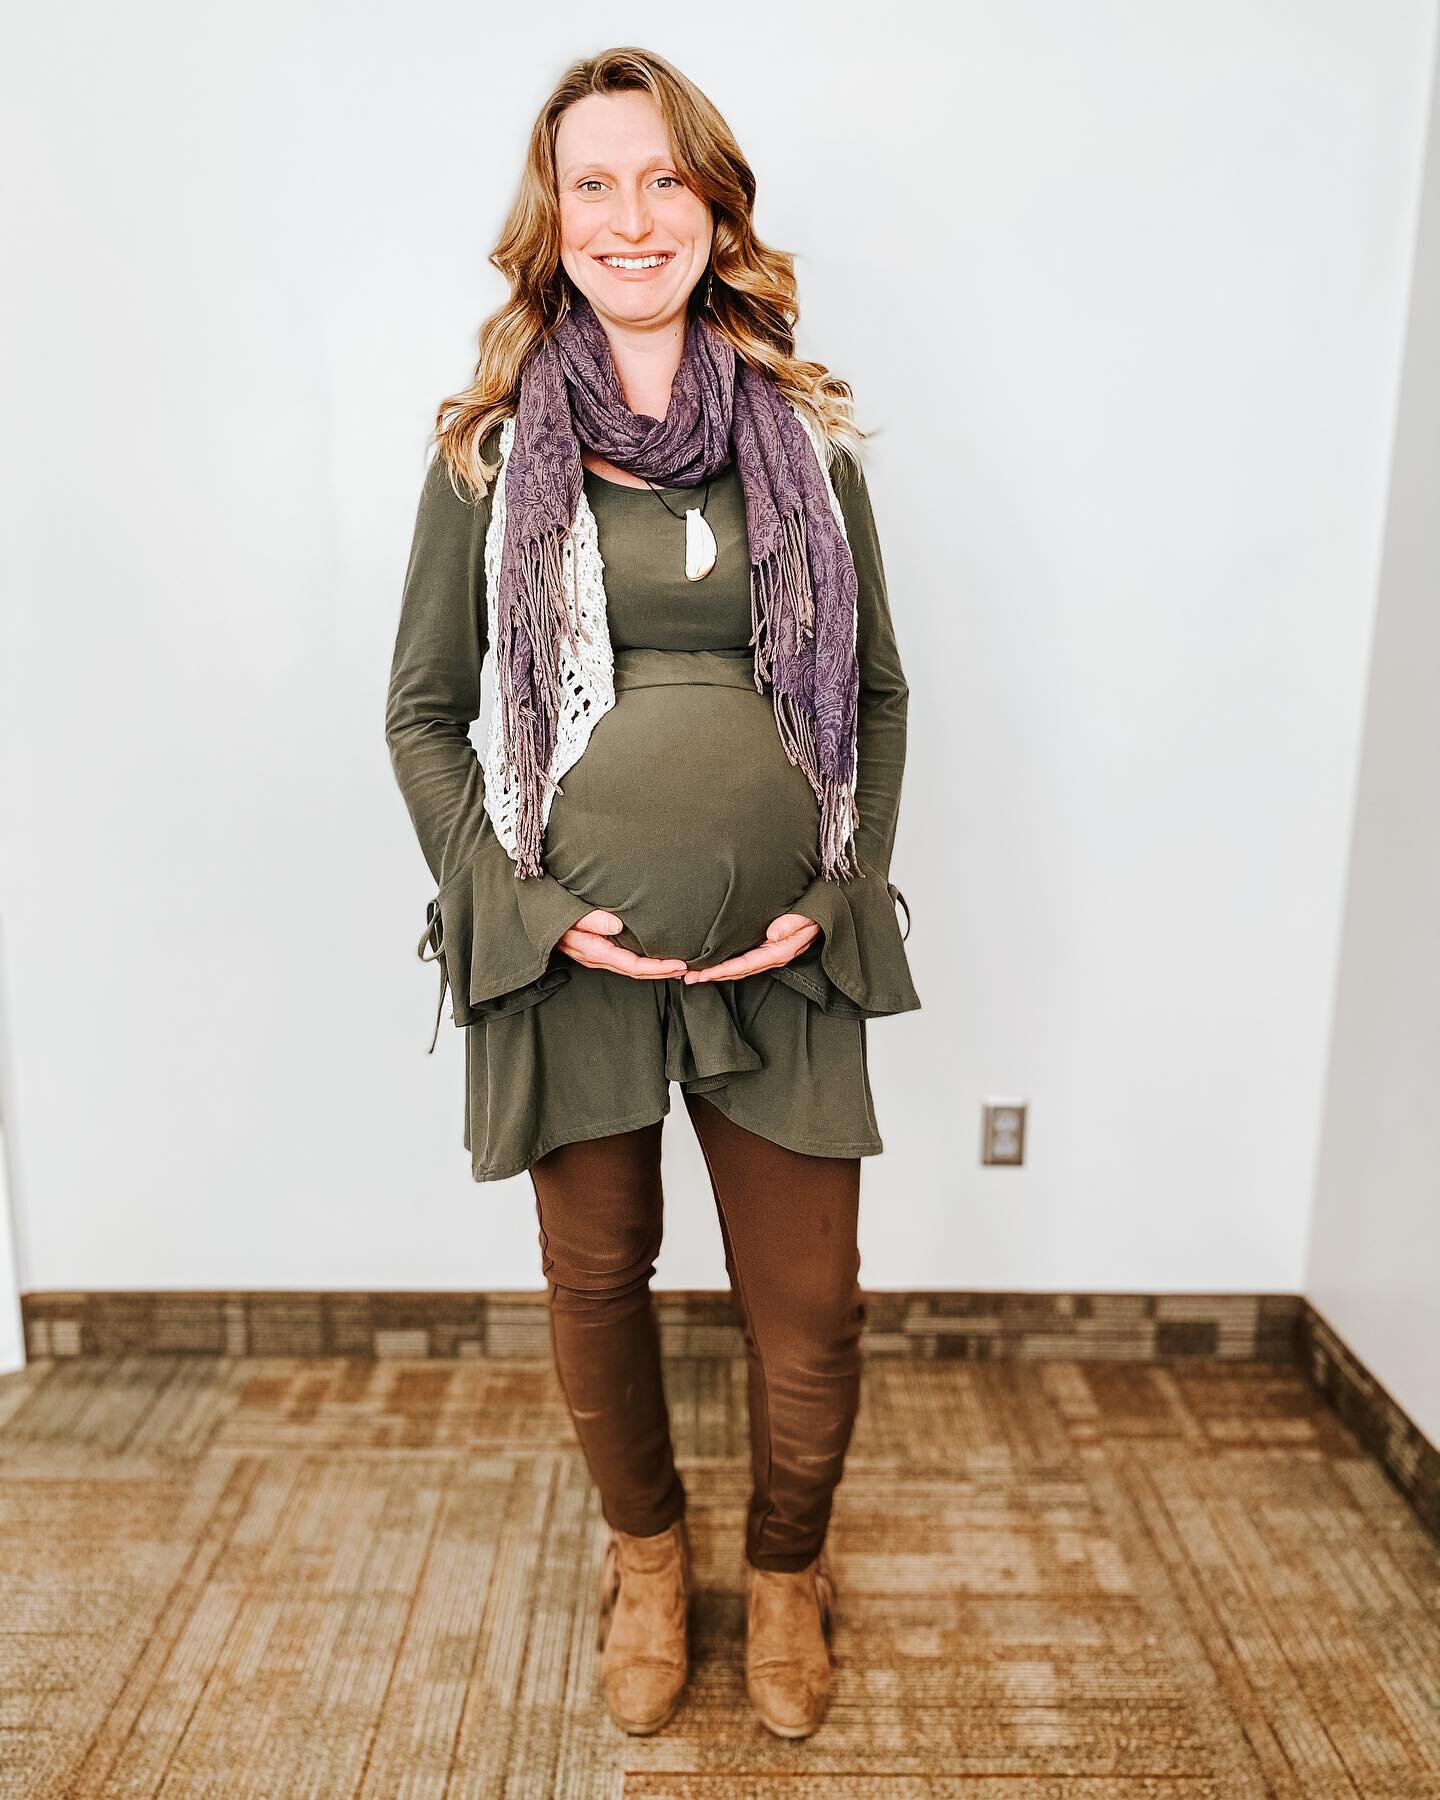 Happy Bump Day!!! 👶🏻💚

This mama had such a good adjustment, giving her massive relief in her hips. Afterwards, Alex was able to rebozo her. During the rebozo session, we felt so much warmth, comfort and excitement. We definitely think this mama i